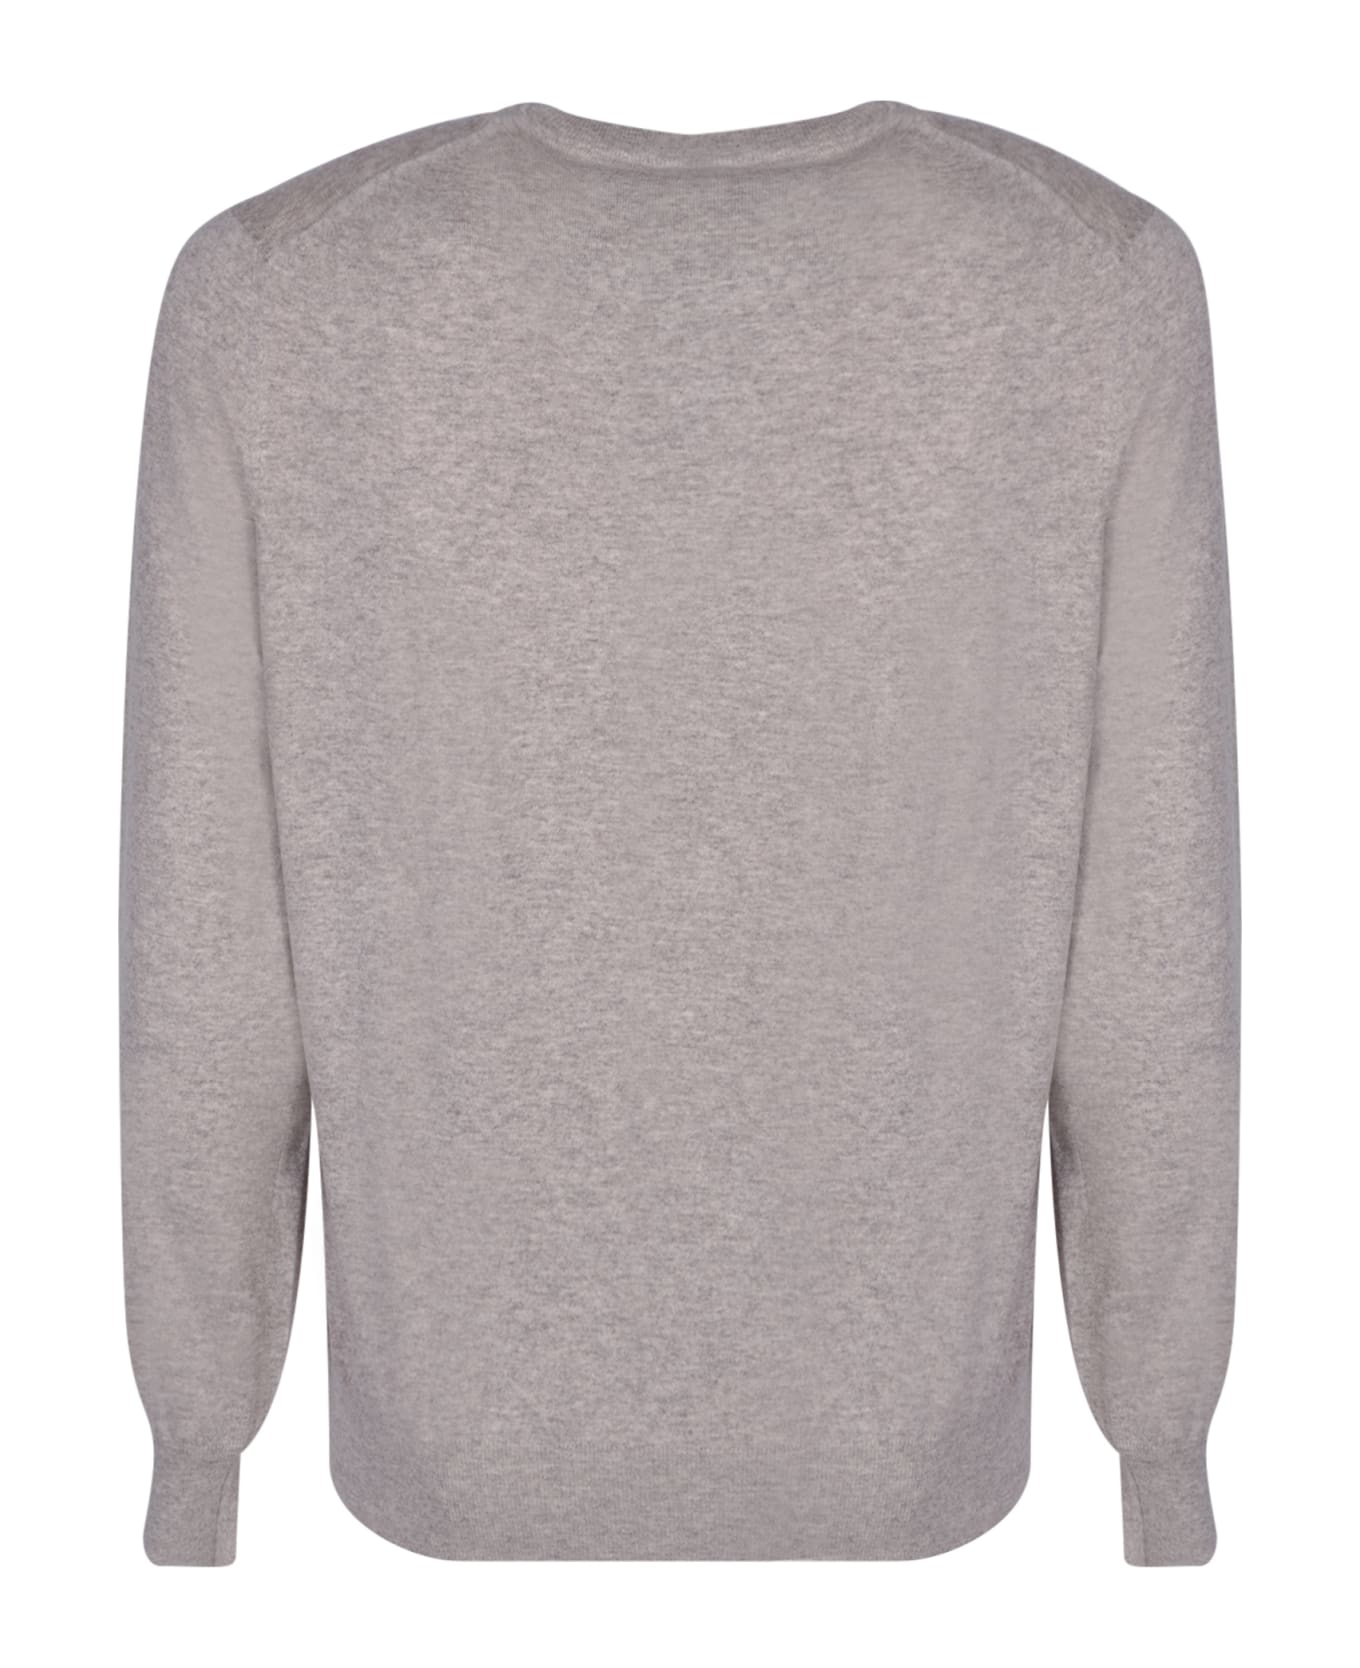 Colombo Cashmere Beige Pullover - Beige